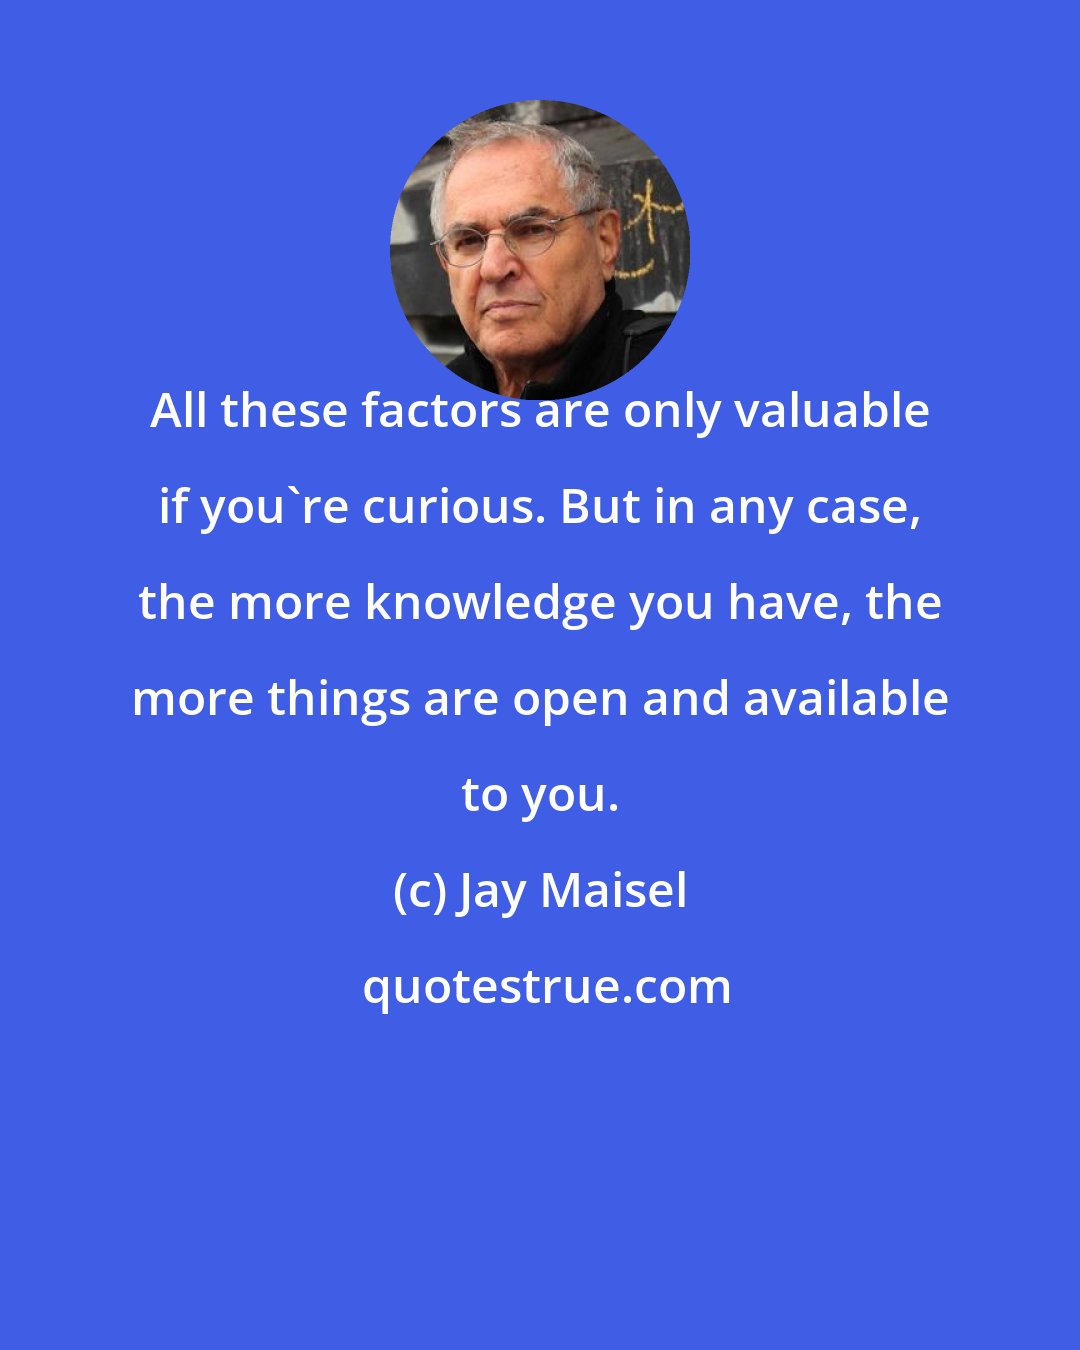 Jay Maisel: All these factors are only valuable if you're curious. But in any case, the more knowledge you have, the more things are open and available to you.